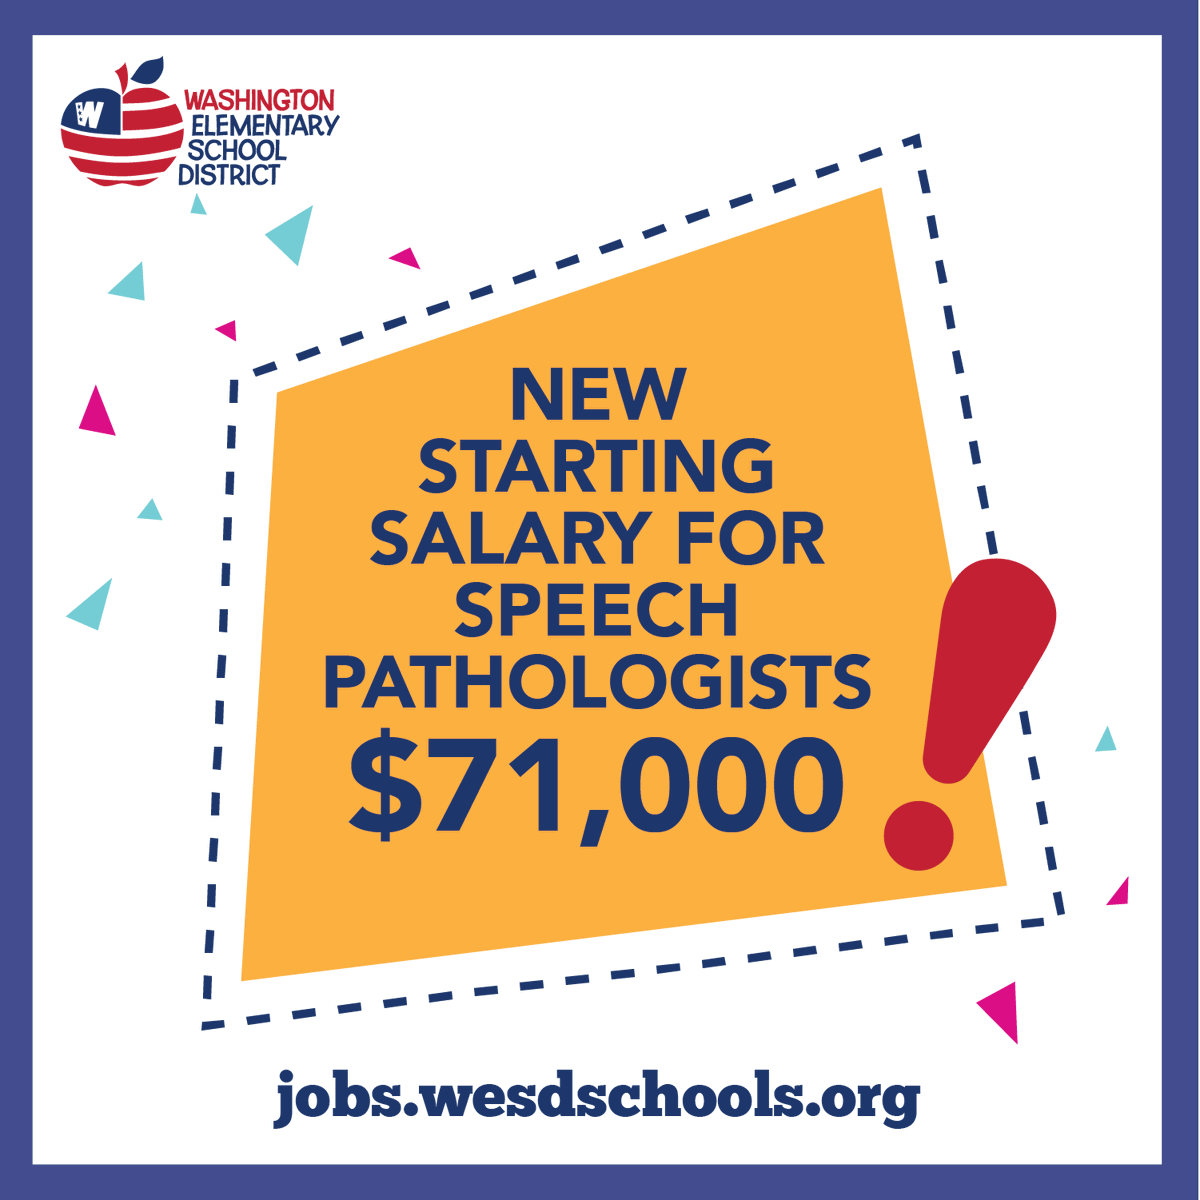 The WESD Governing Board approved new salary increases for teachers, occupational/physical therapists, psychologists and speech pathologists, and approved a 3% salary increase for all employees, as well as one-time stipends. Visit jobs.wesdschools.org to apply. #WESDFamily